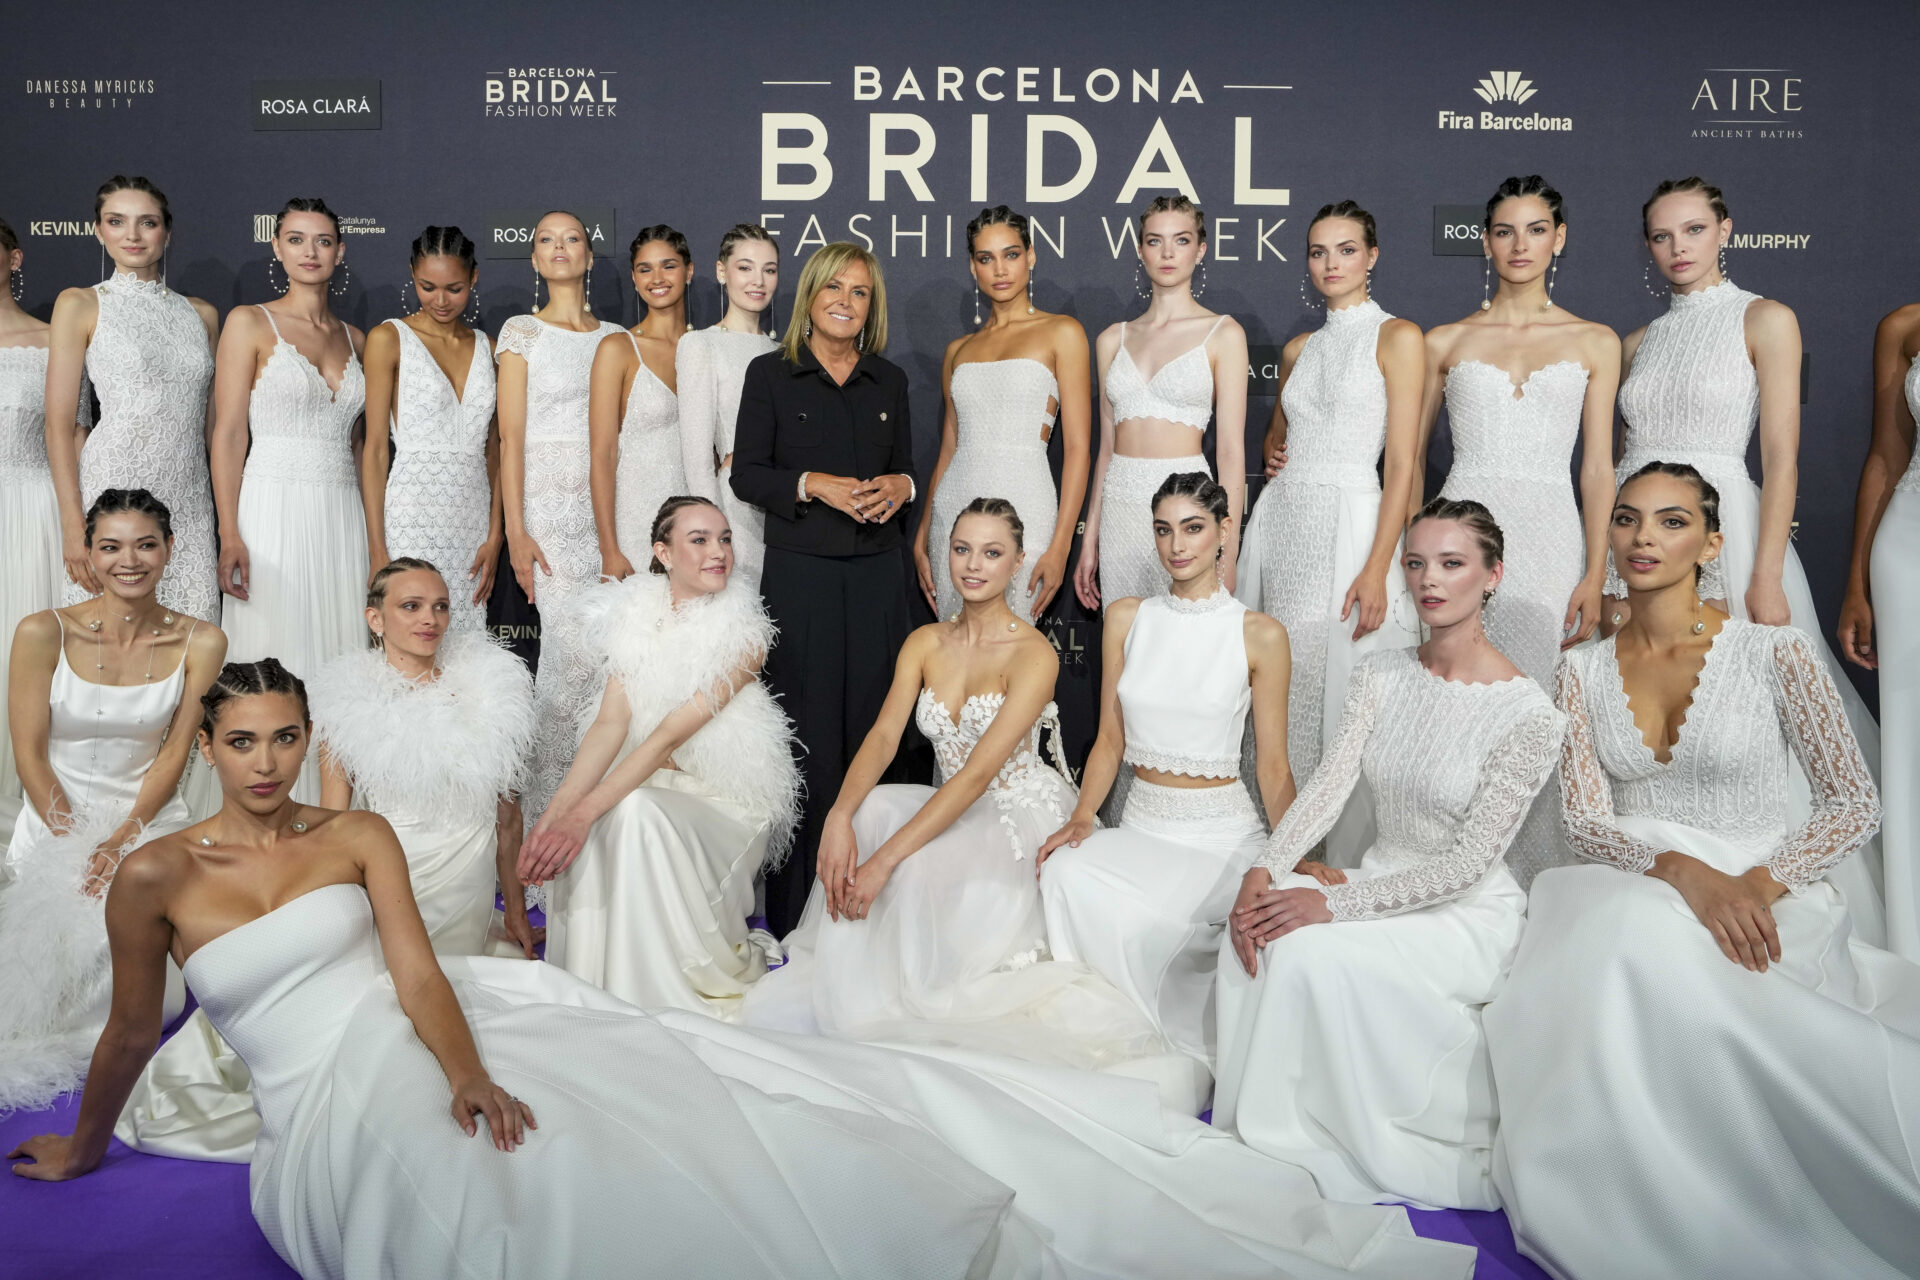 Valmont Barcelona Bridal Fashion Week will host the fashion shows